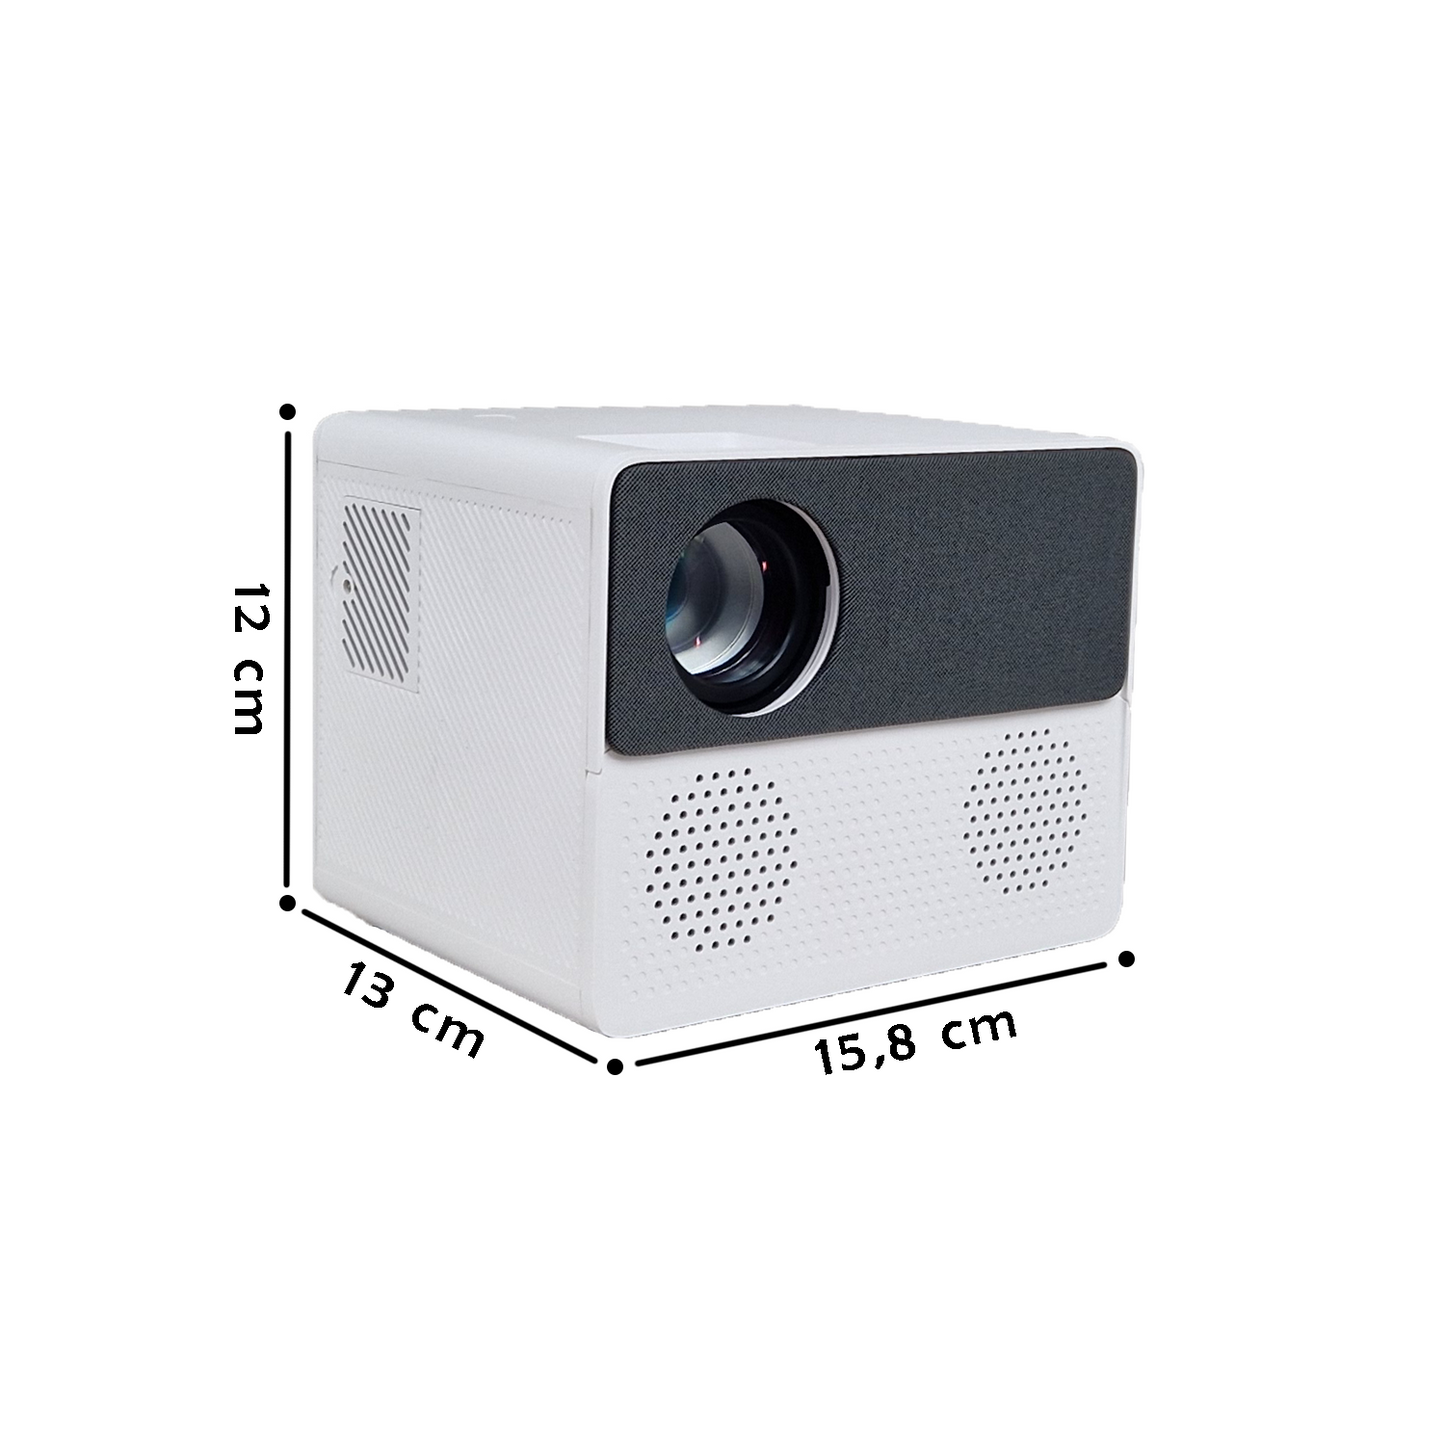 Portable projector with built-in speakers 